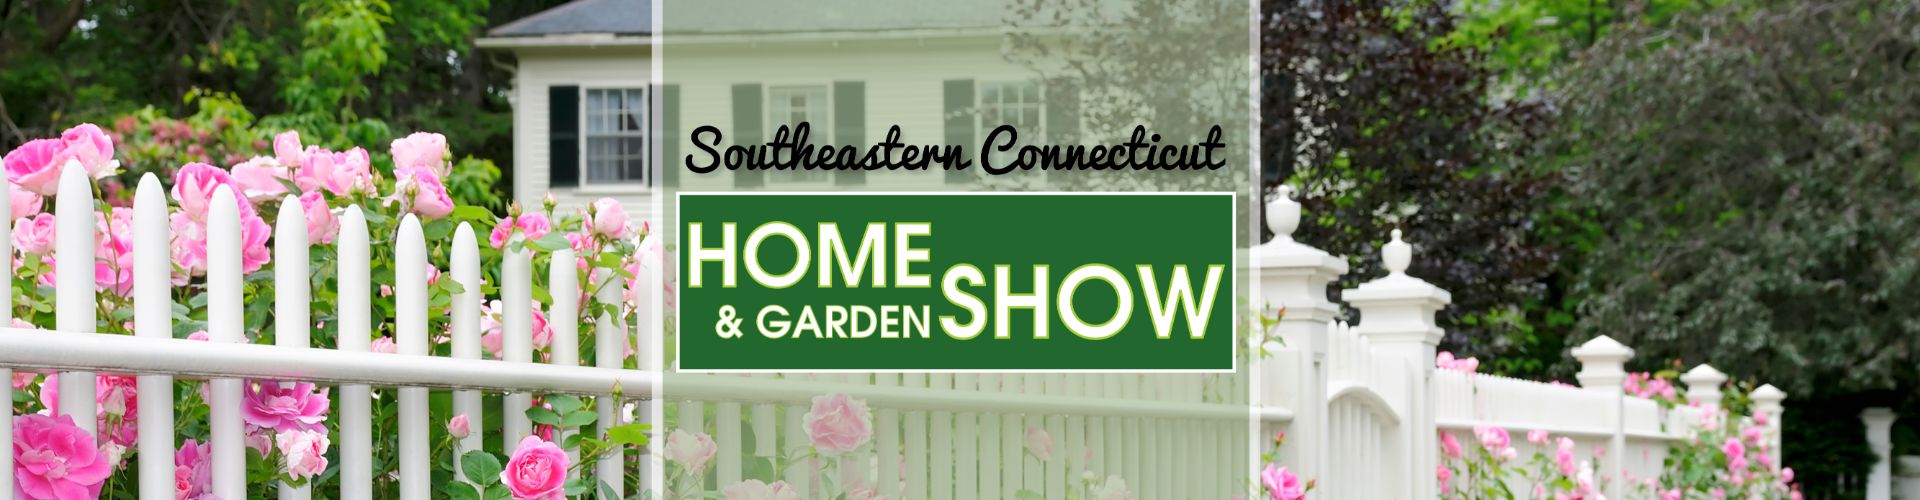 SOUTHEASTERN CT HOME SHOW